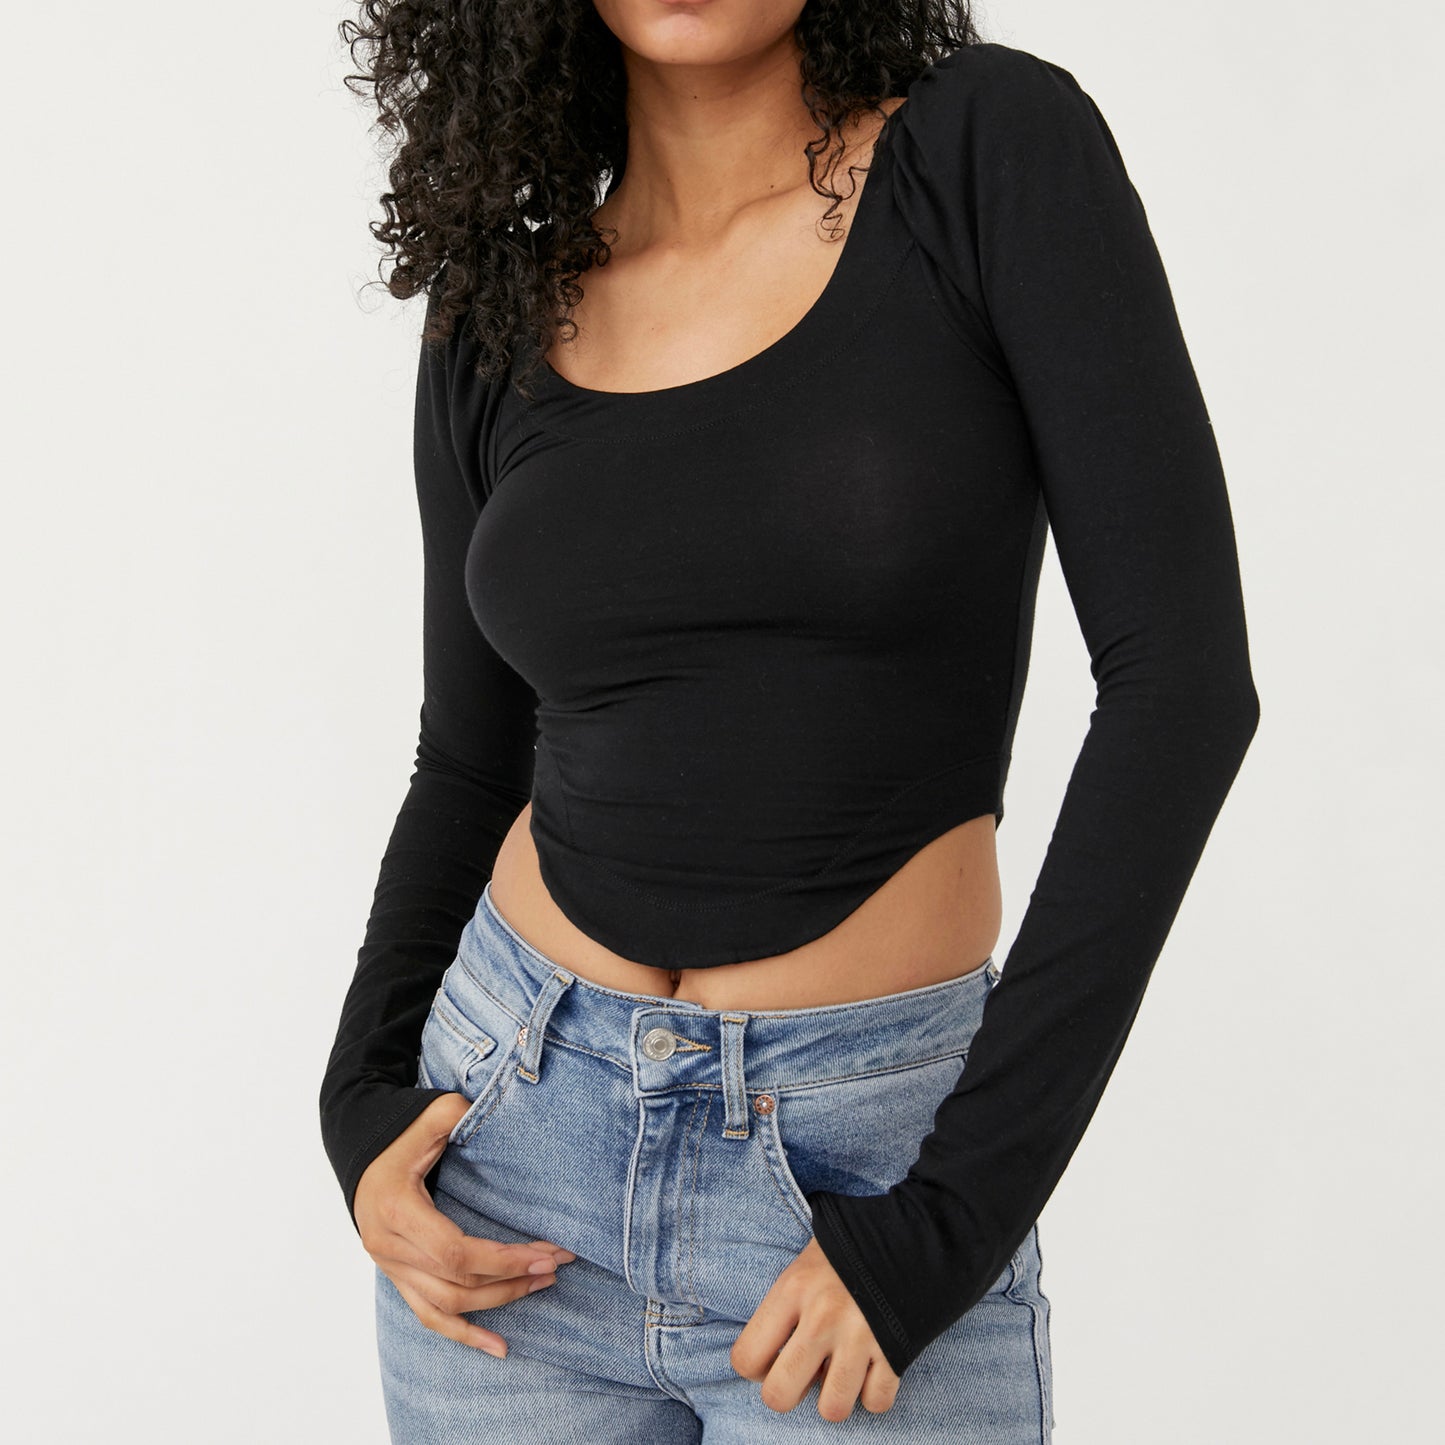 Free People Willow Top. A lace-up back, pronounced rounded hem, and voluminous shoulders add just the right amount of drama to the Free People Willow Top